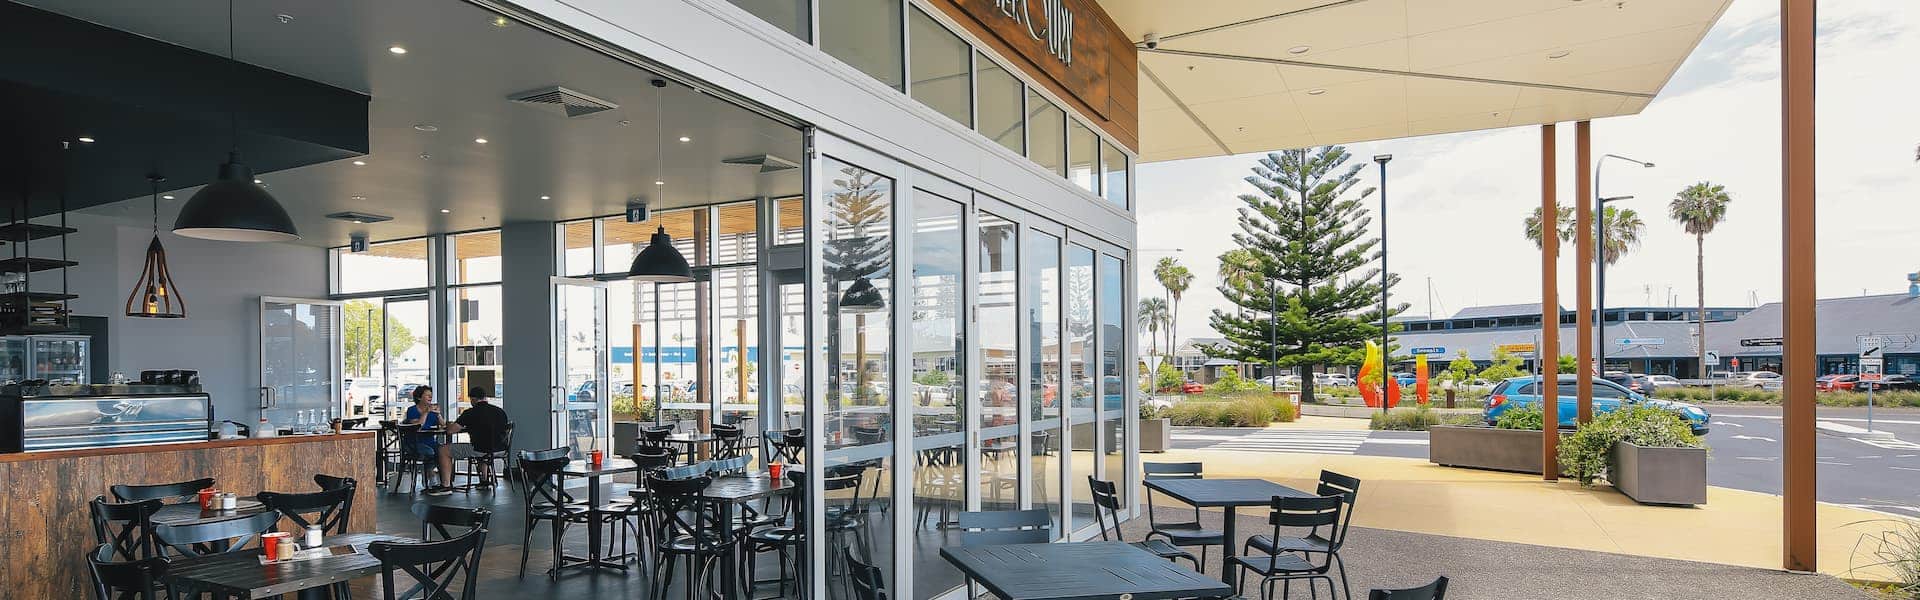 Mercury Cafe Project — Collins W Collins In Port Macquarie, NSW